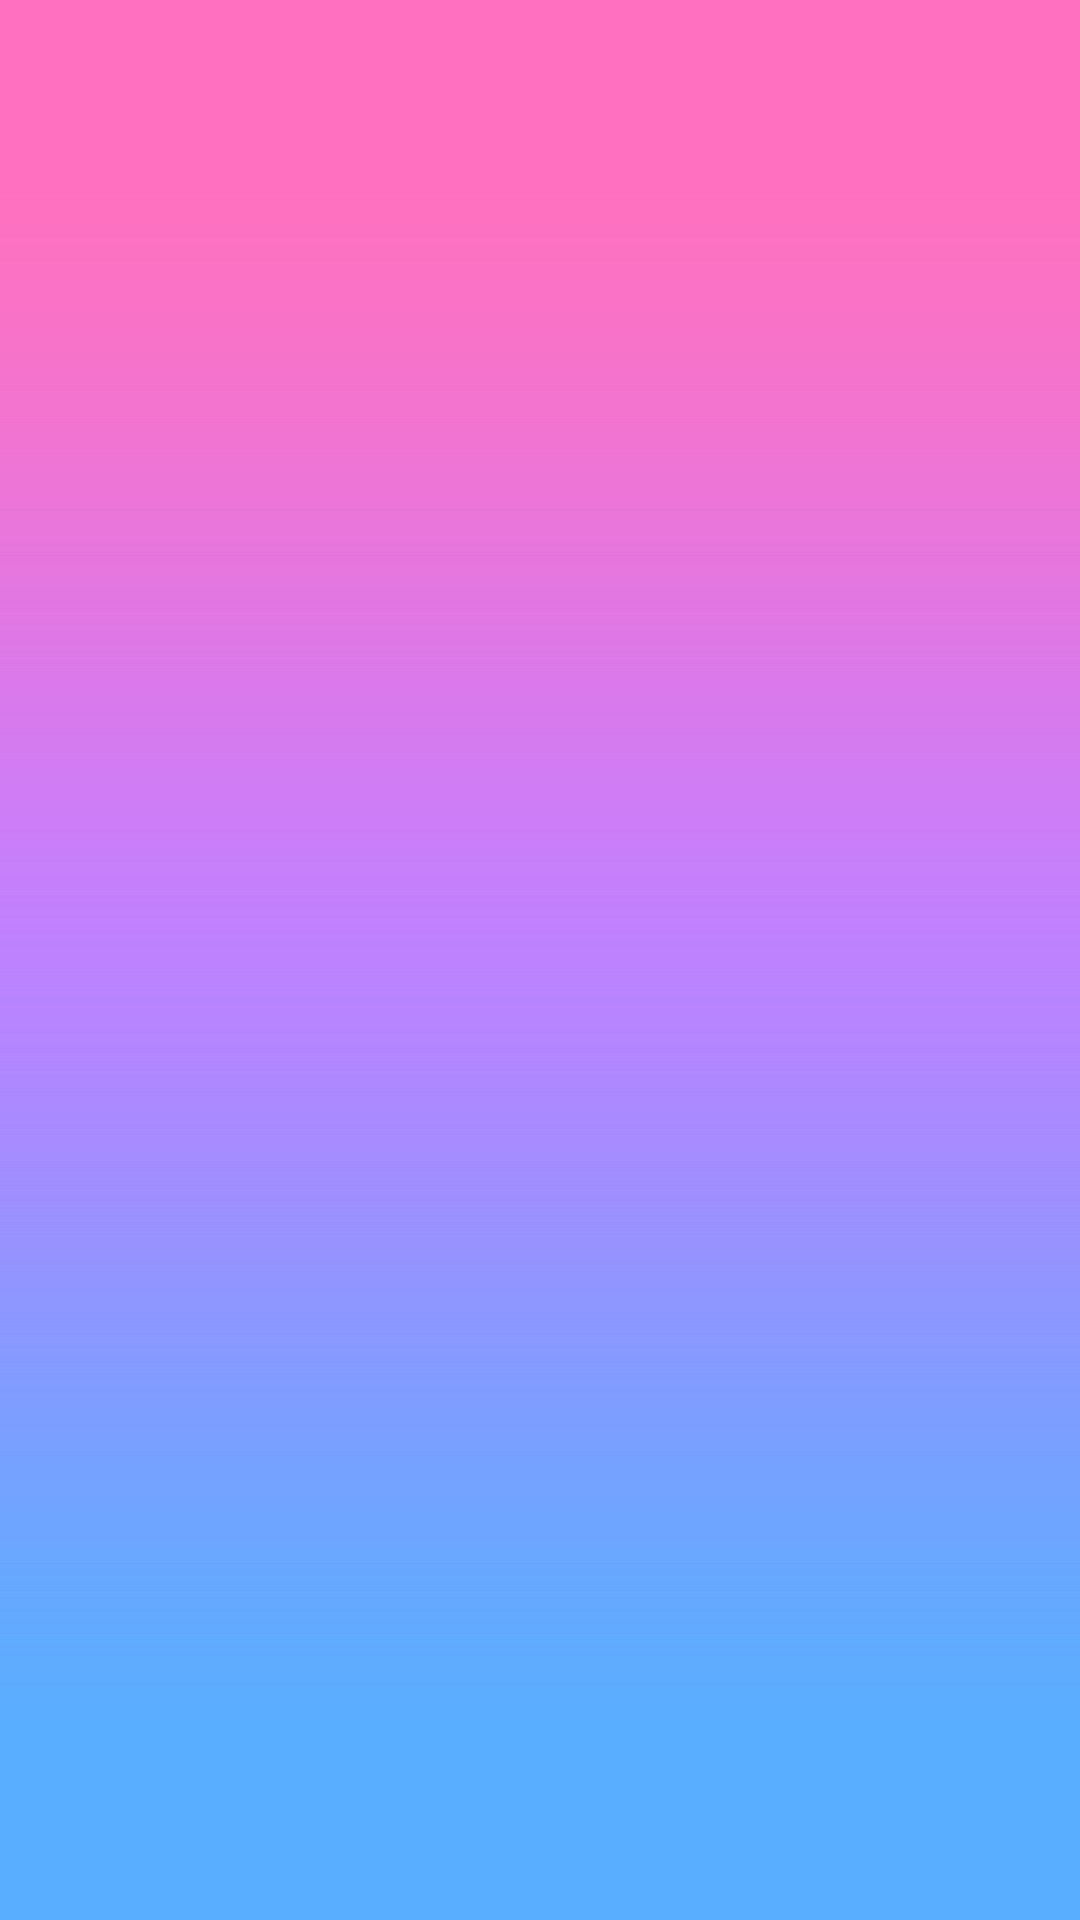 Gradient Android Wallpaper With high-resolution 1080X1920 pixel. You can use this wallpaper for your Android backgrounds, Tablet, Samsung Screensavers, Mobile Phone Lock Screen and another Smartphones device